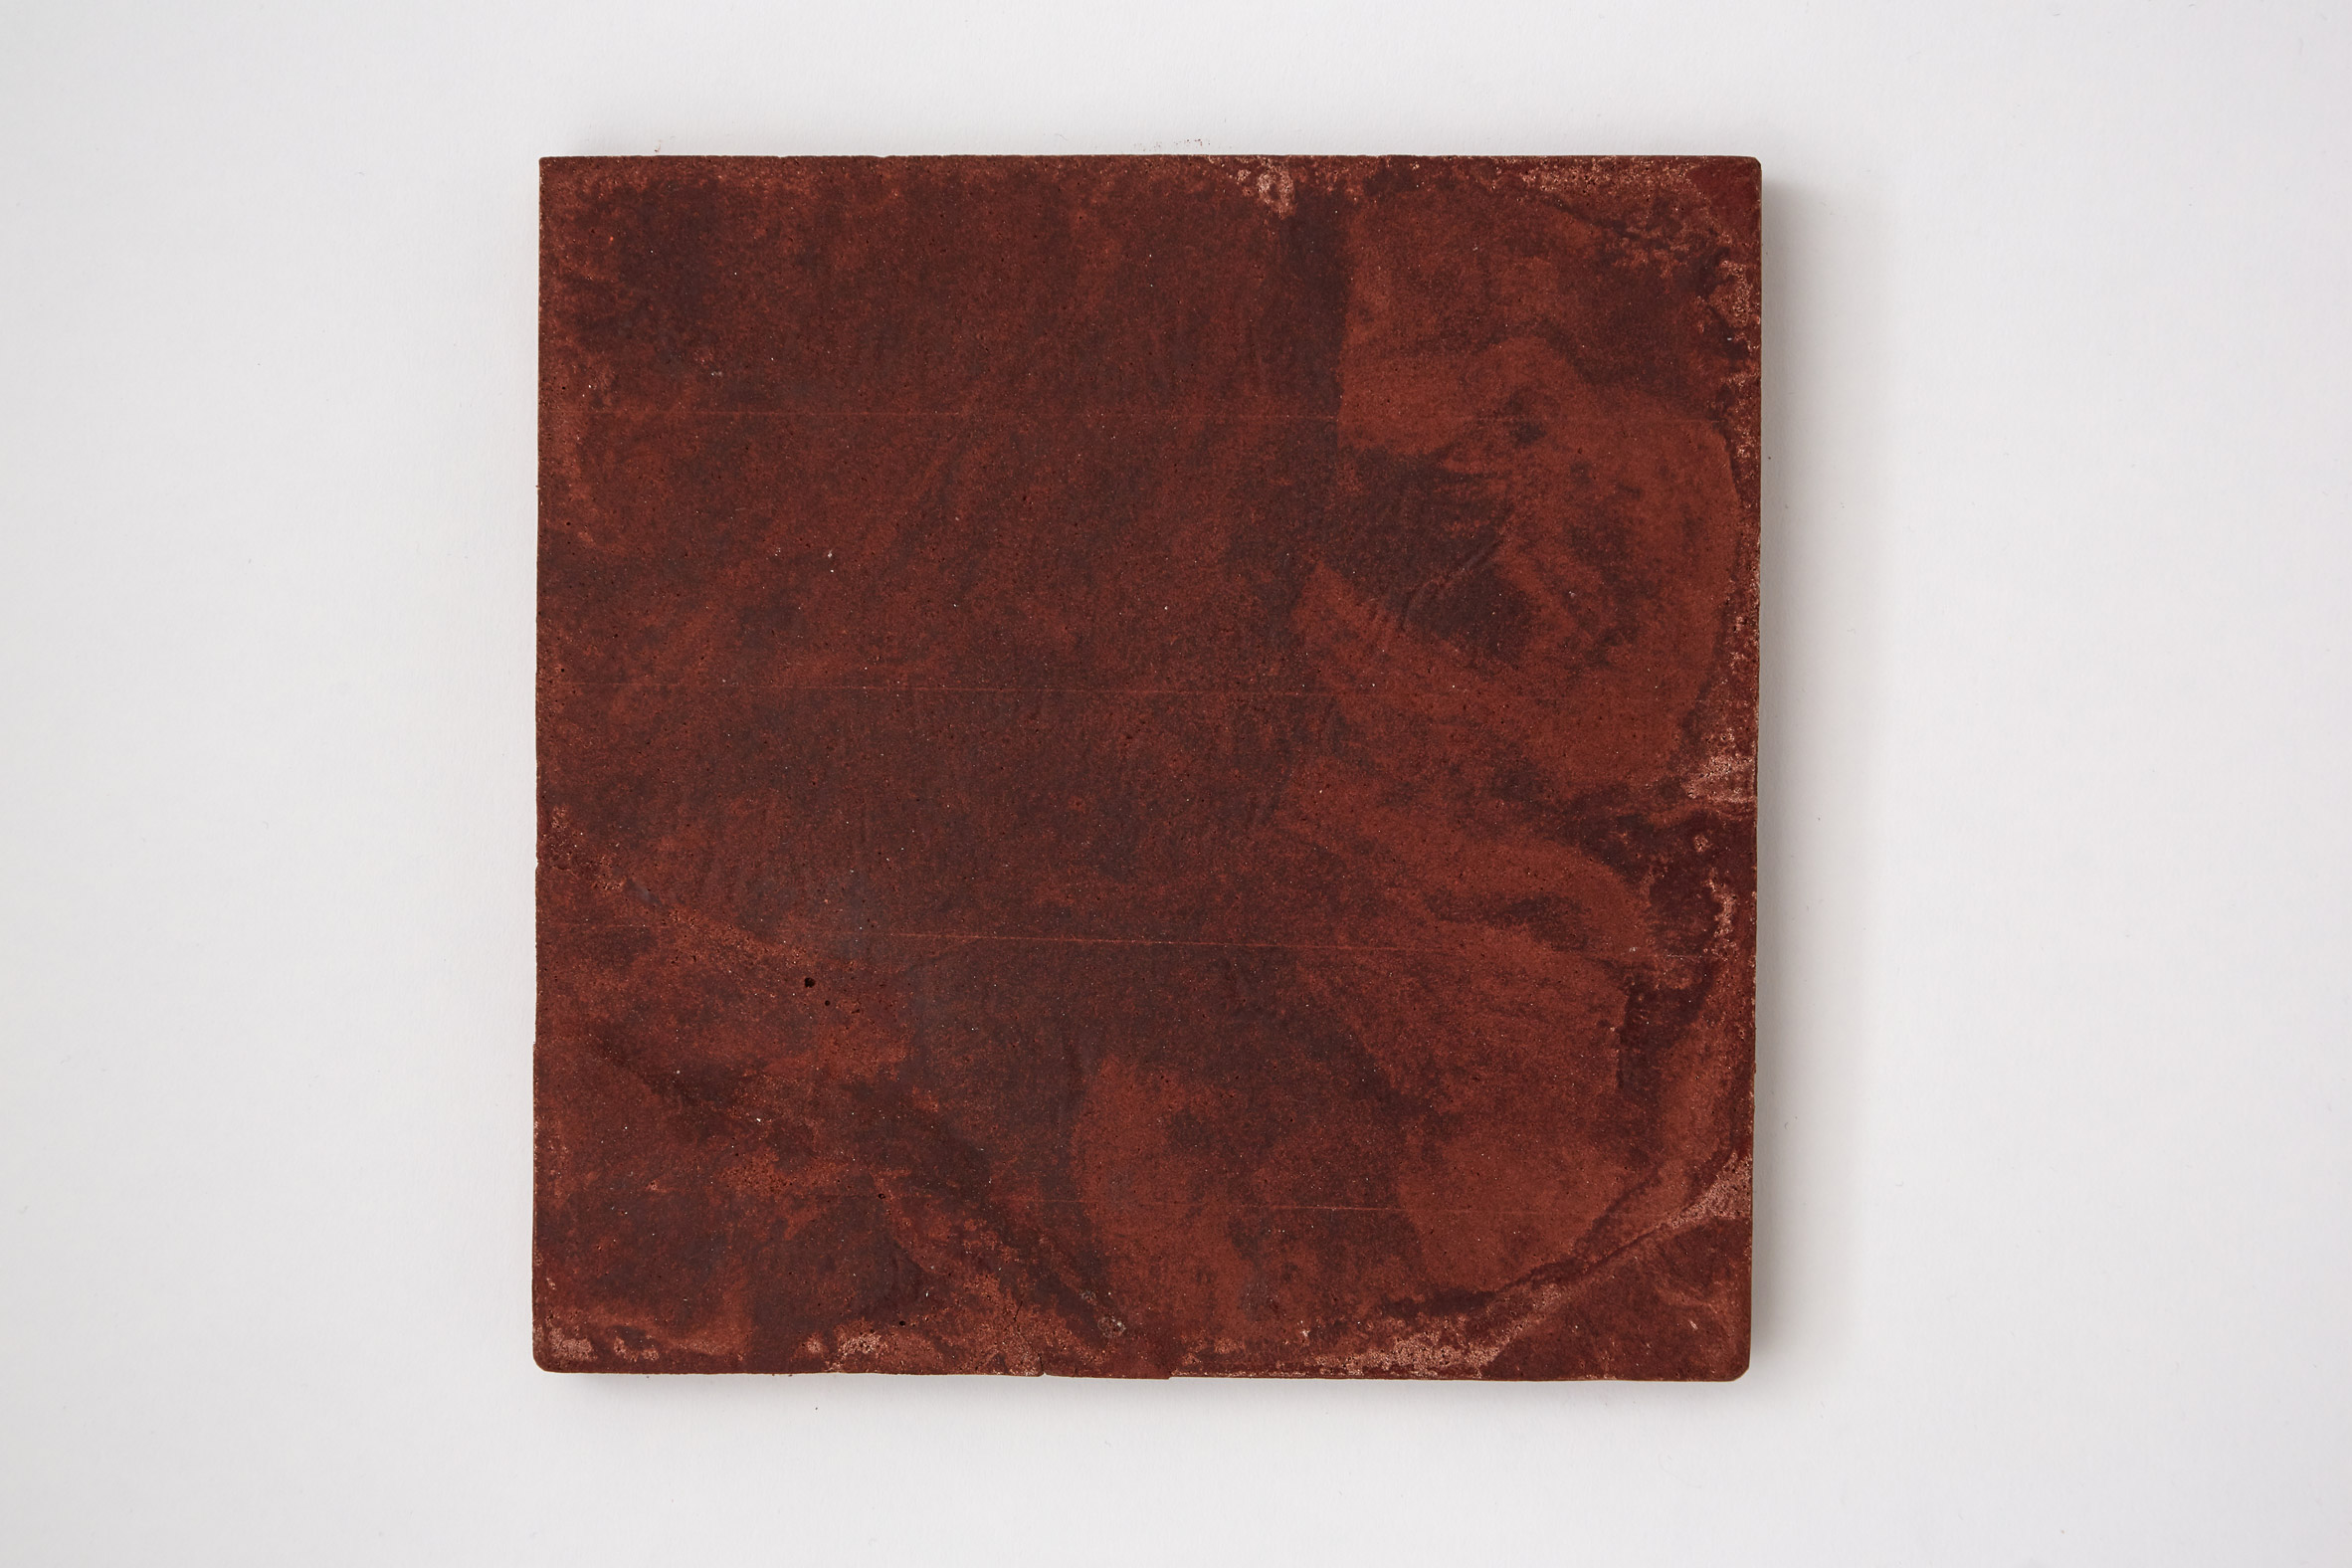 Dark red, marbled tile made from bio-concrete by Irene Roca Moracia and Brigitte Kock